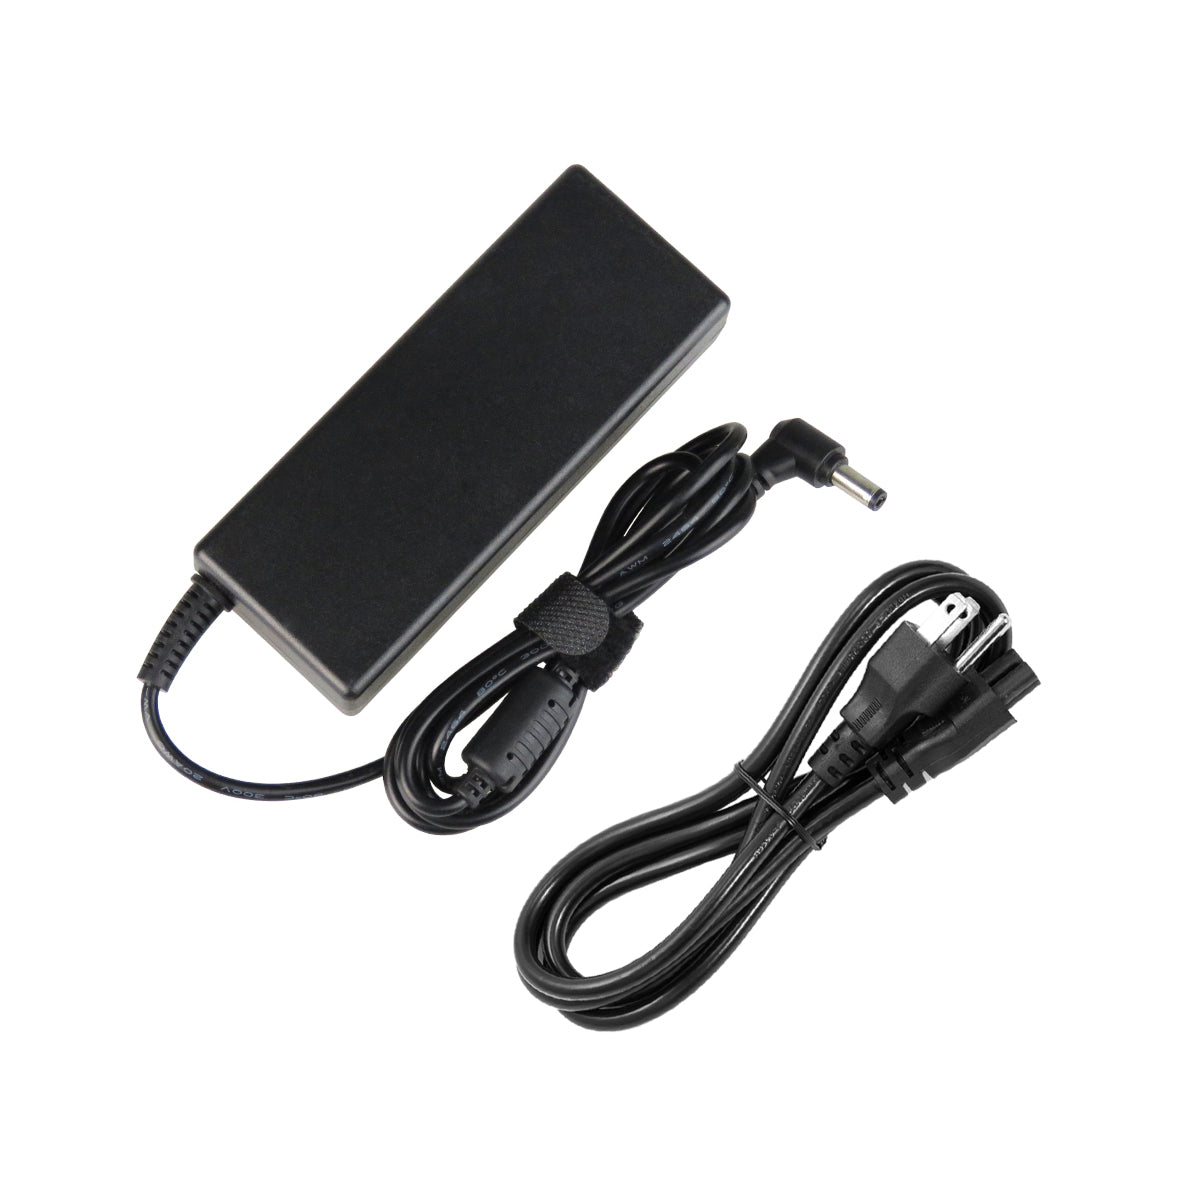 AC Adapter Charger for ASUS X551 Series Notebook.